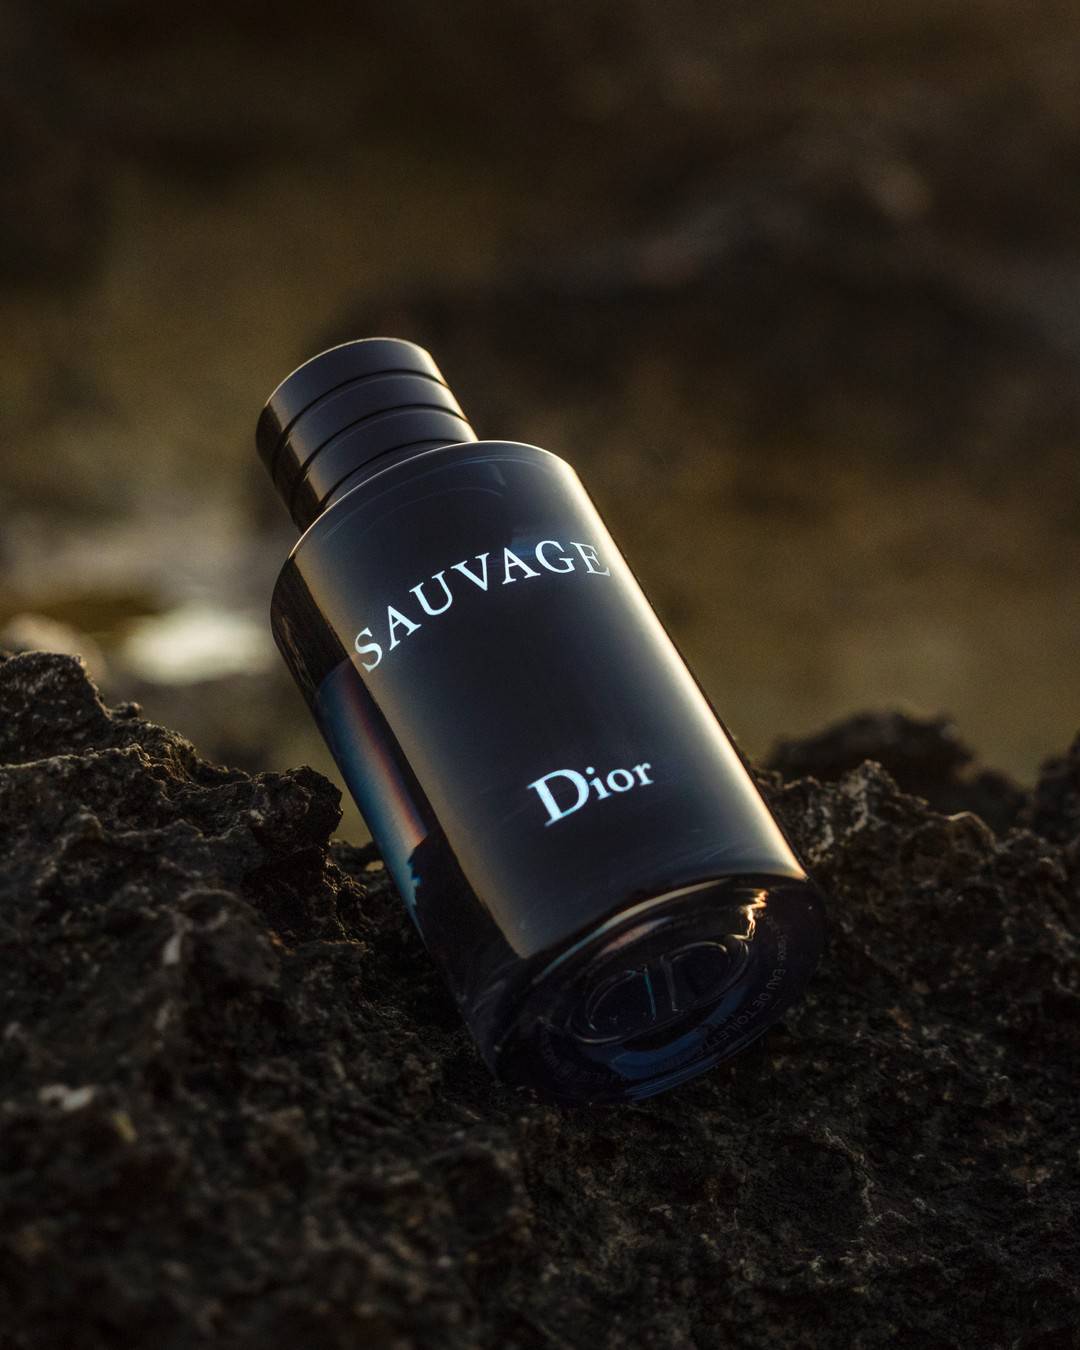 a bottle of dio sauvage cologne on a rock